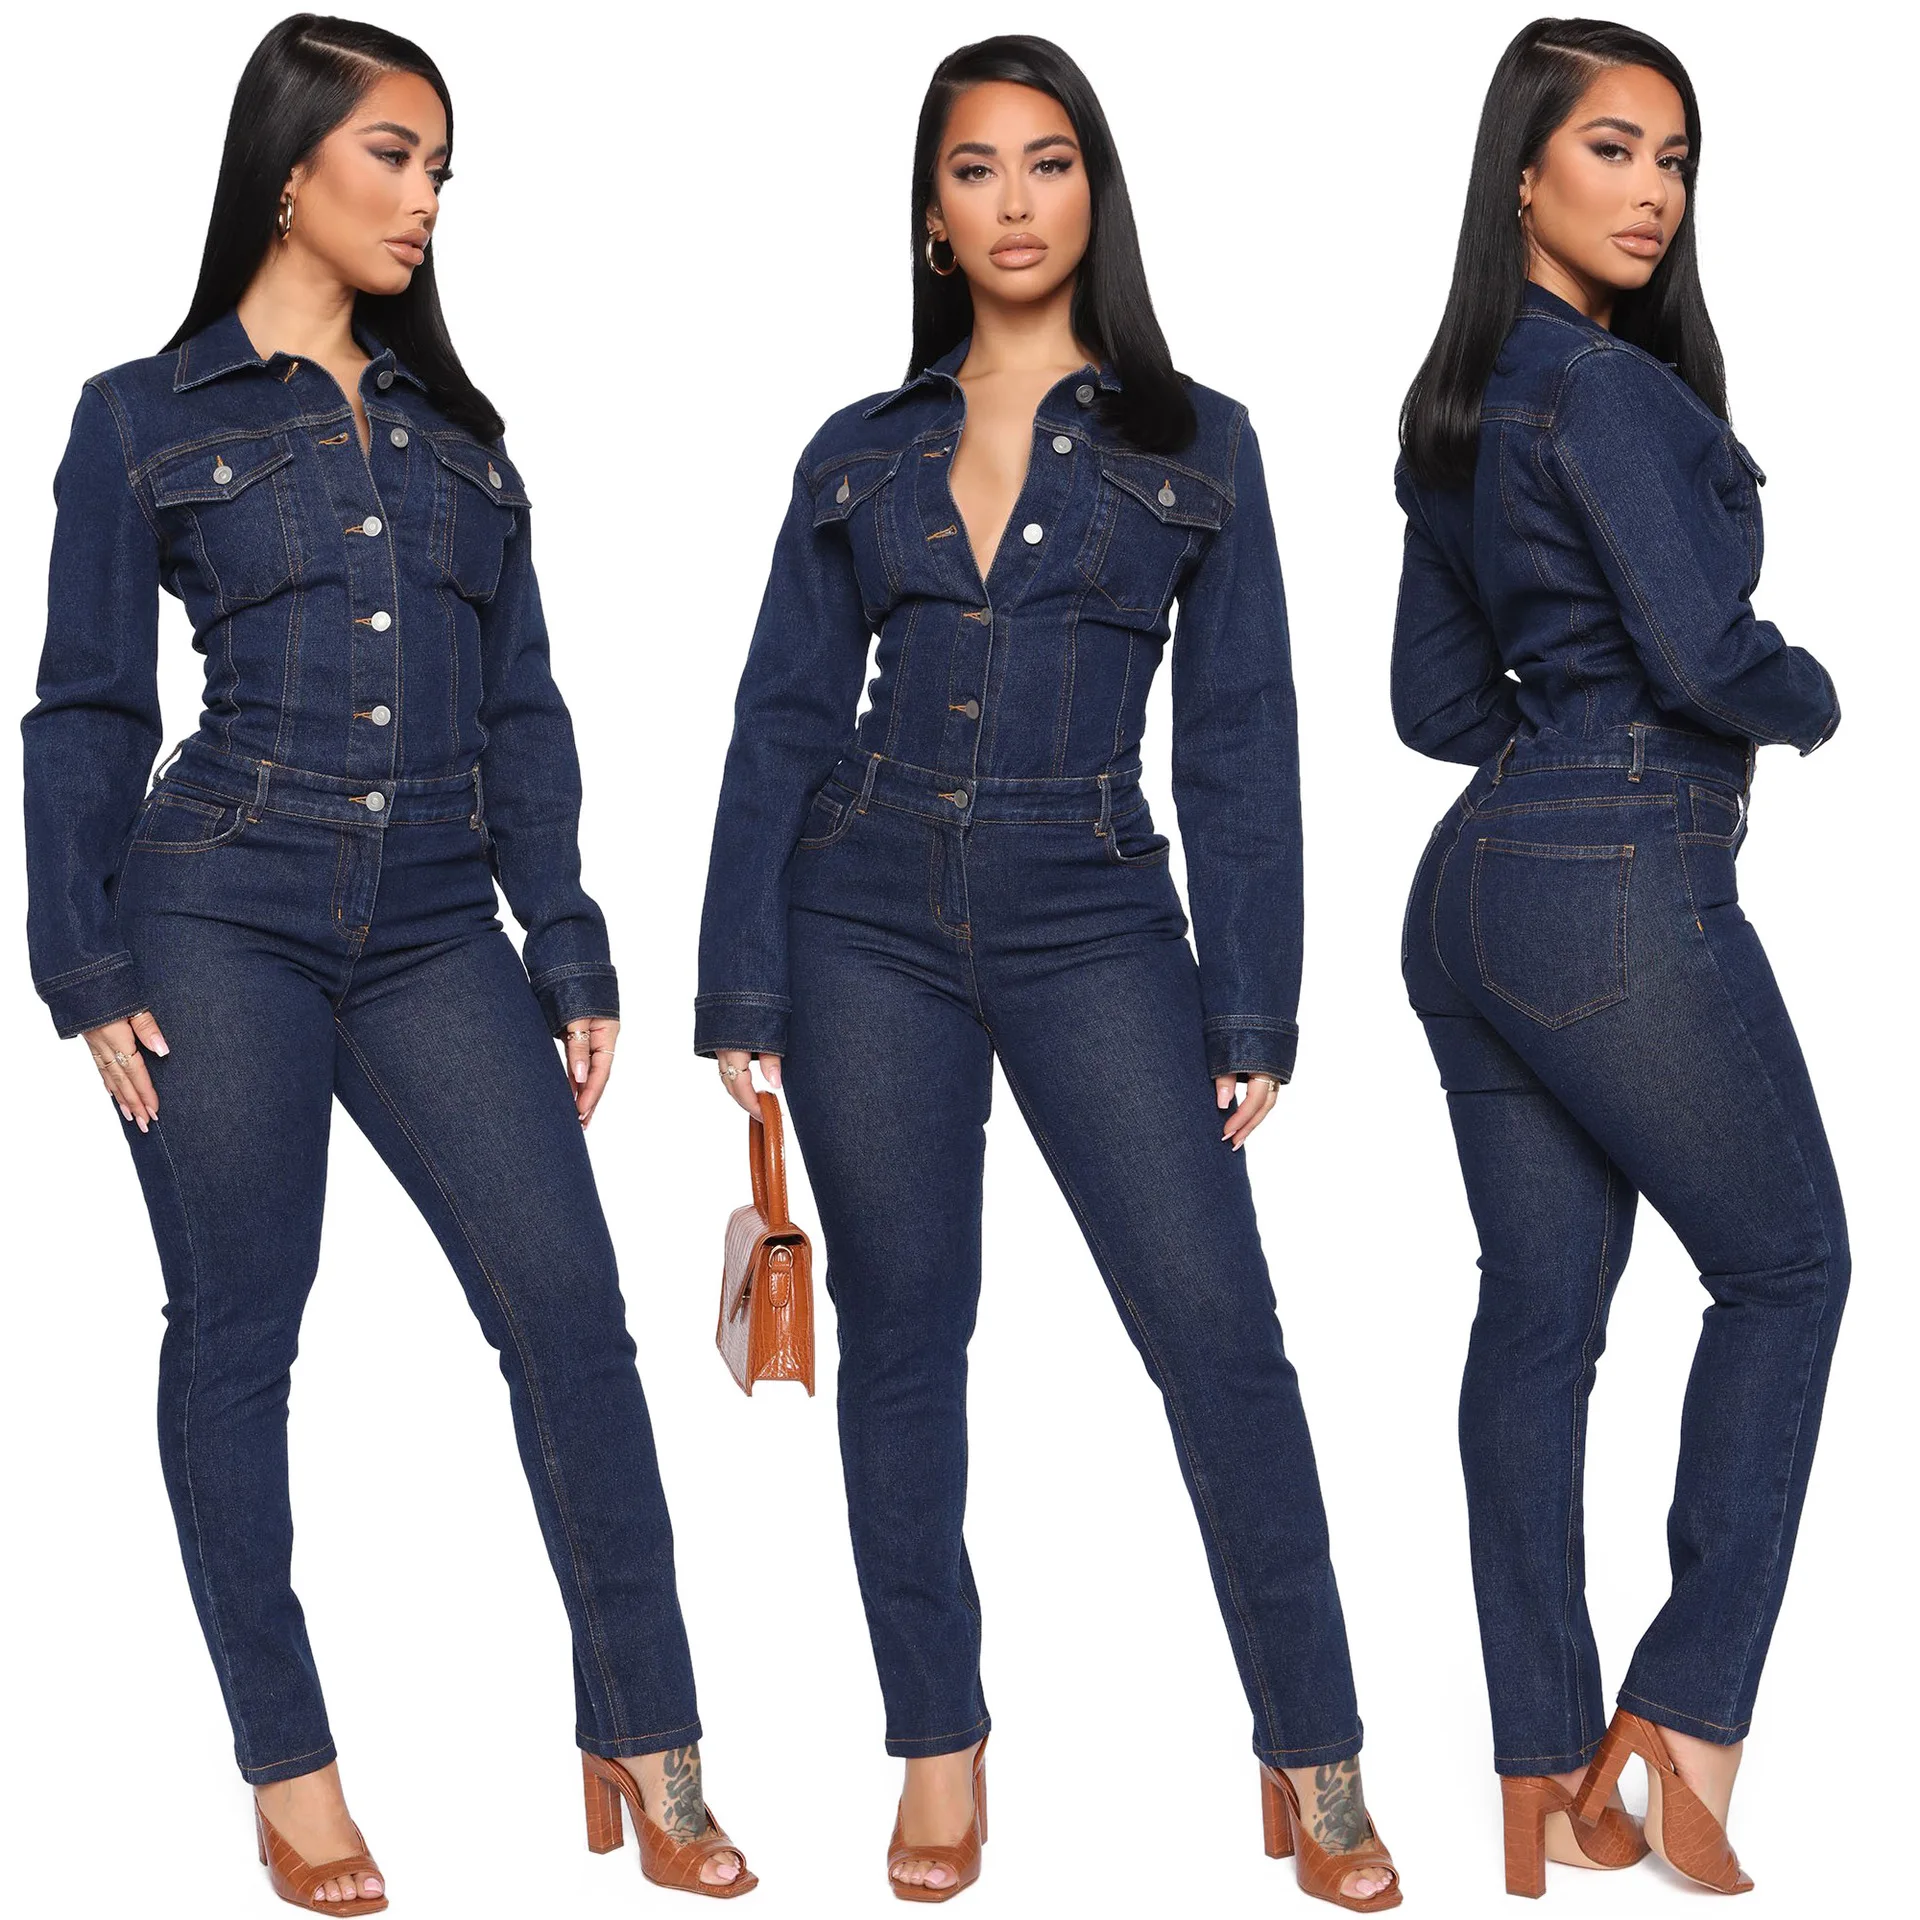 

2021 Winter Sexy Jeans Fashion Stand High Waist Sports Women Turtle Neck Corset Jumpsuit Rompers Women